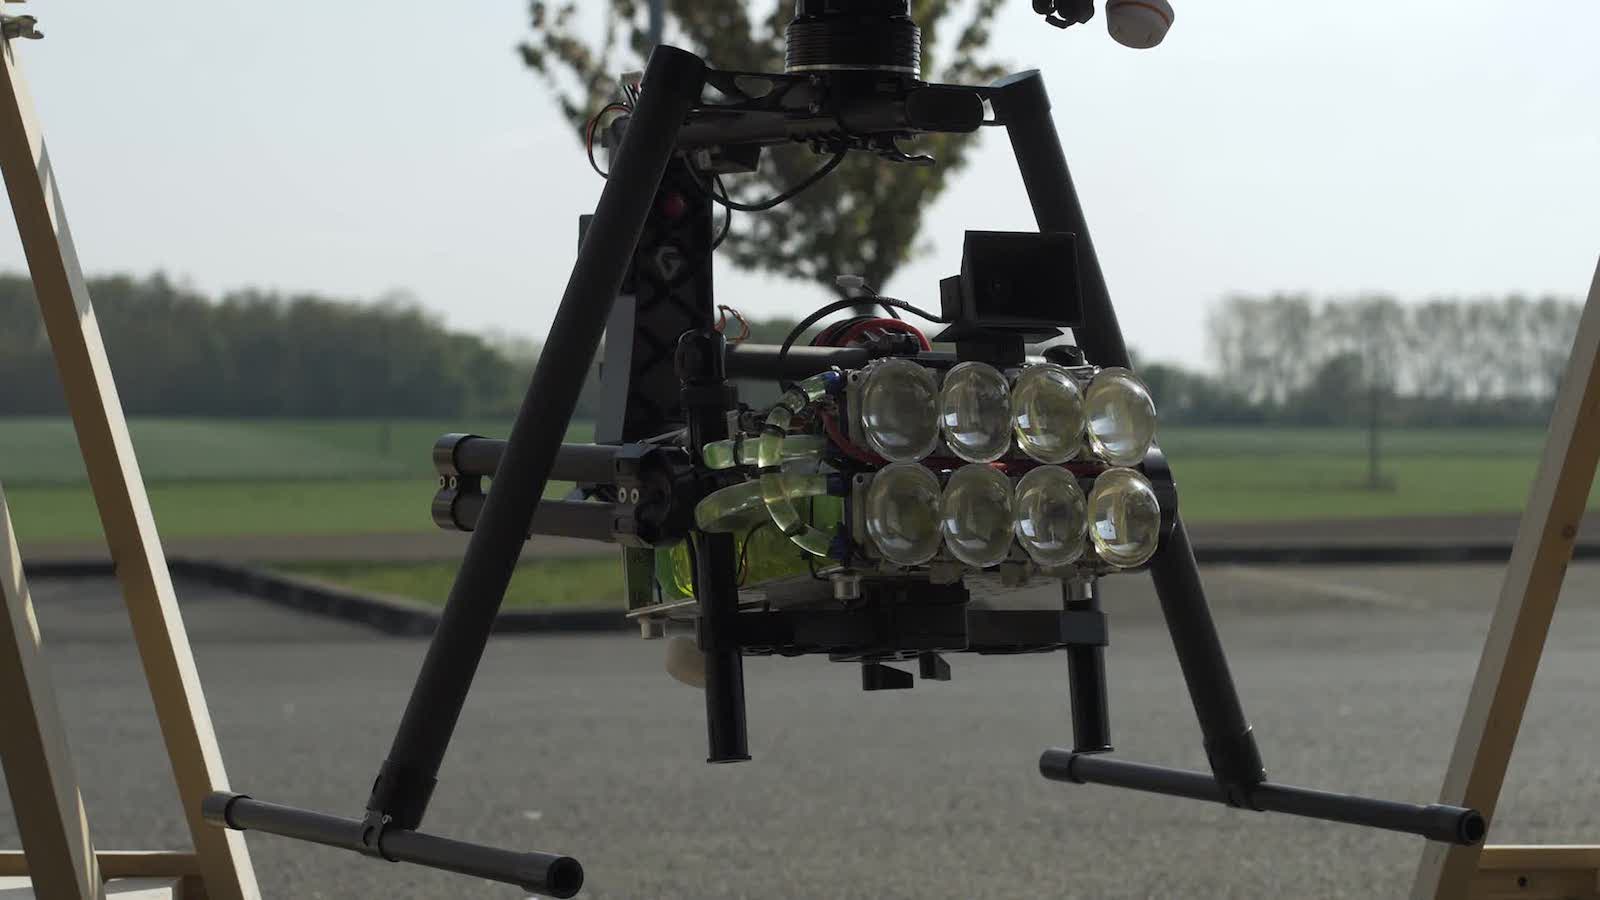 Director Straps 800W LED to a Drone for Crazy Nighttime Bike Shoot